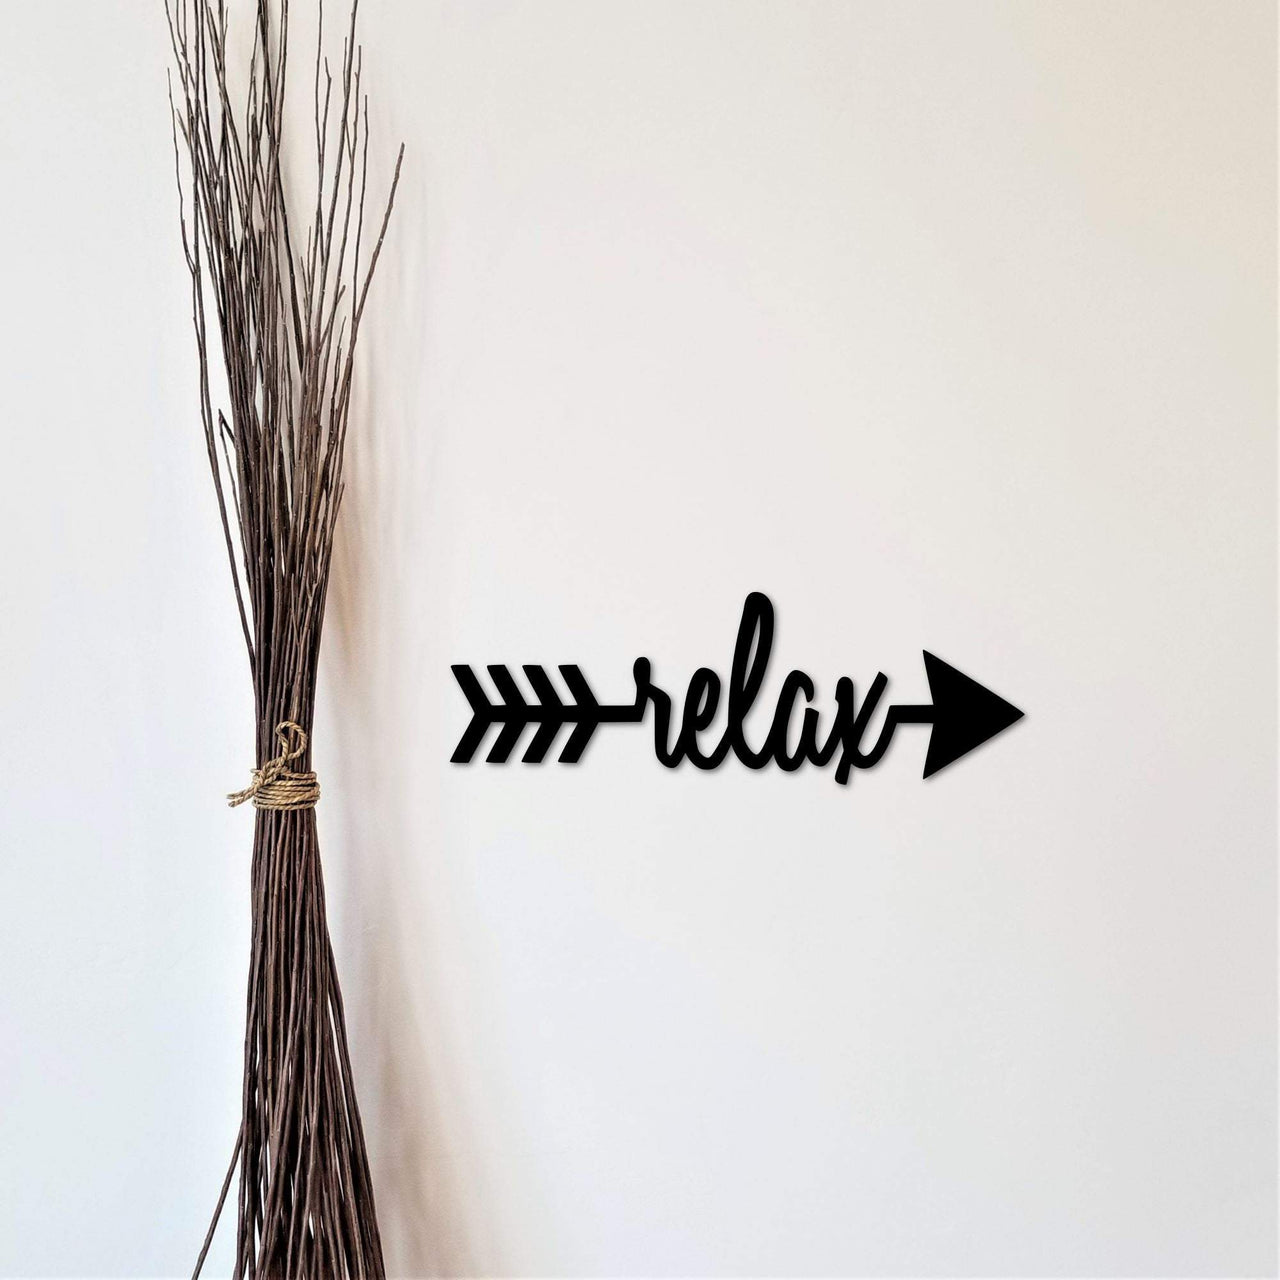 Relax Arrow Metal Wall Art | Master Bathroom Decor | Arrow with Relax Word for the Wall | Unwind Beach, Cabin or Lake House Relax Sign